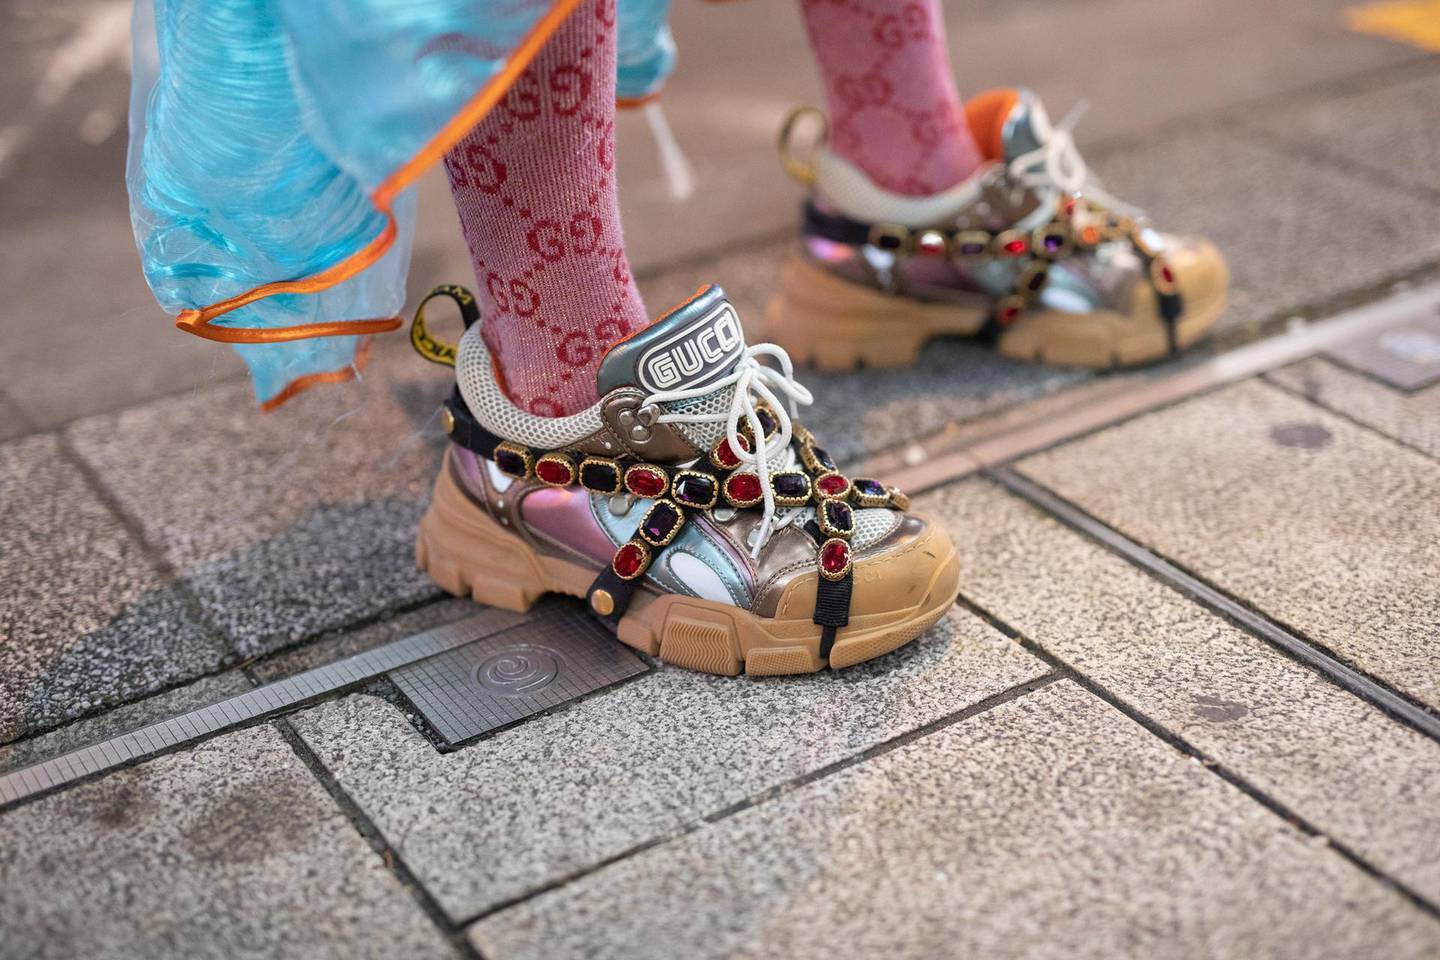 Gucci is eyeing the virtual fashion scene, with its range of augmented reality sneakers, sold as non-fungible tokens (NFTs). Courtesy Gucci